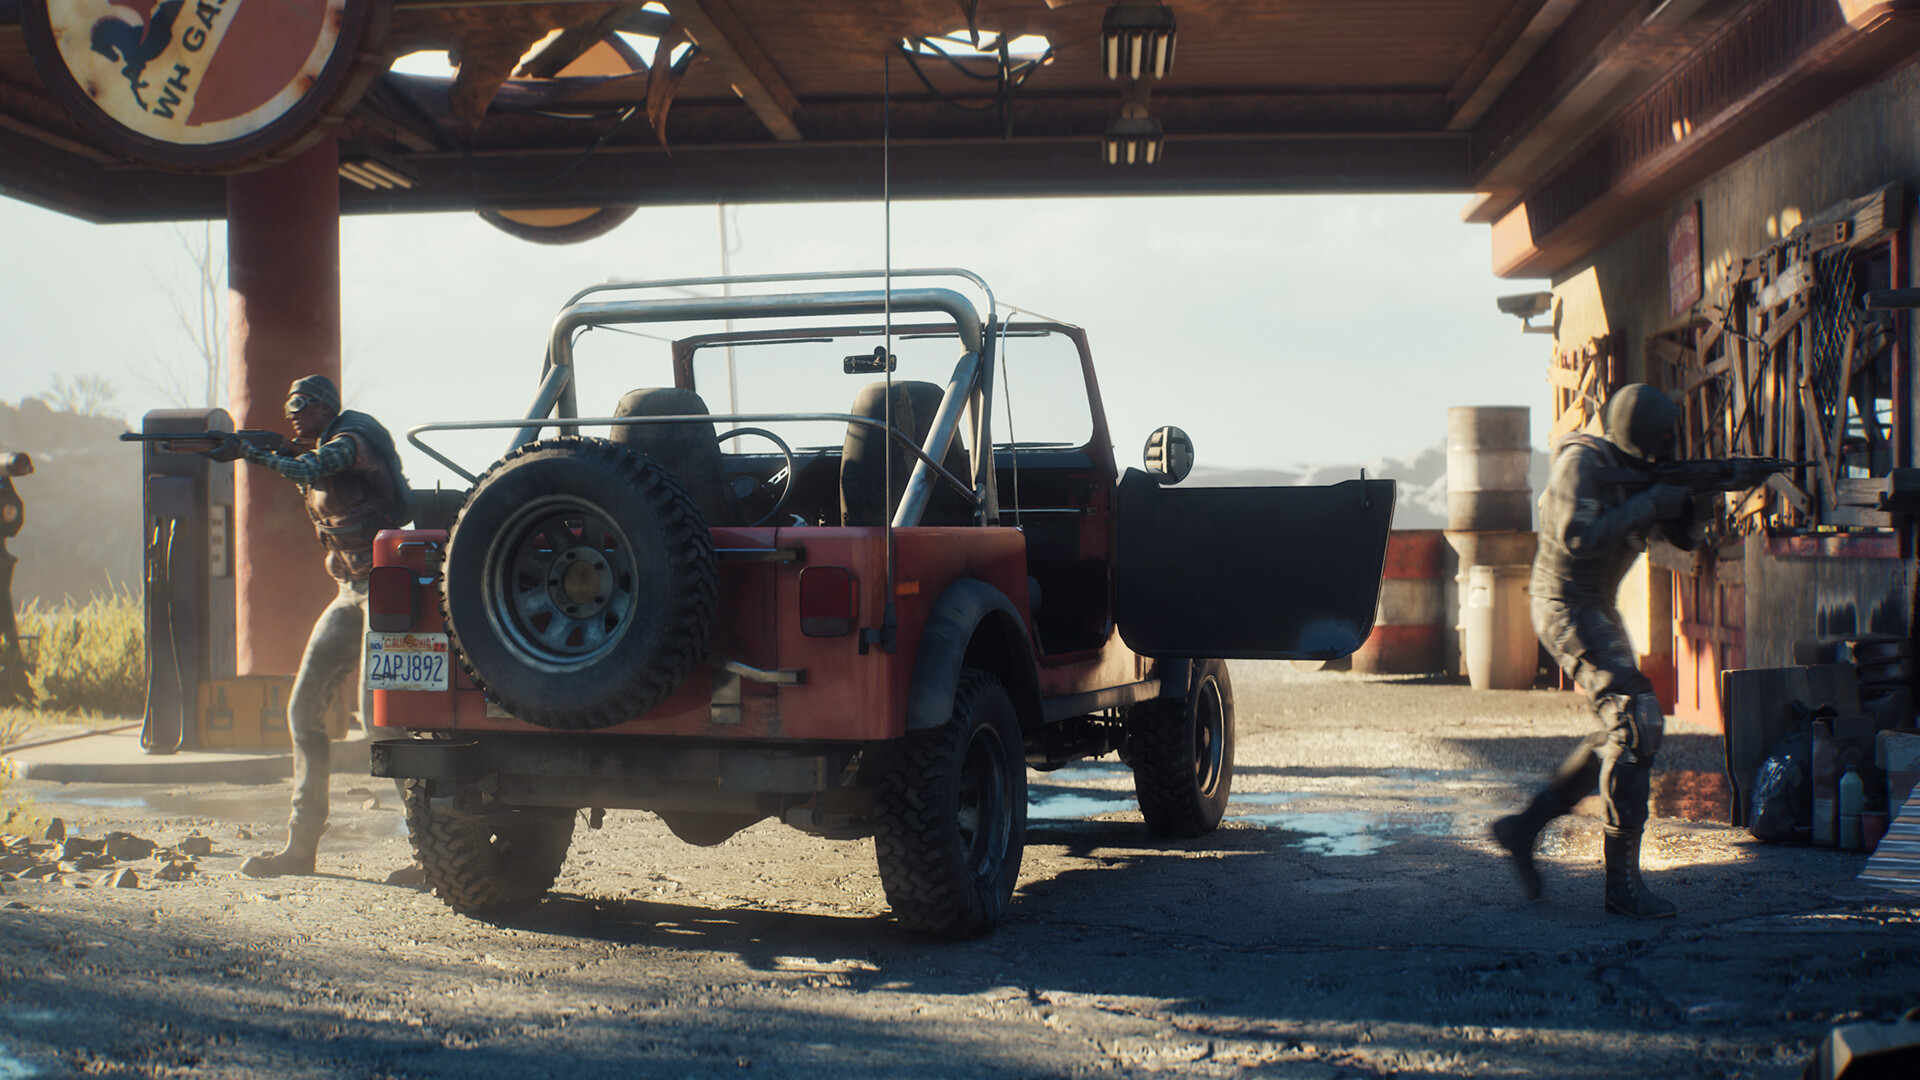 Terminator: Survivors Will Have “Multiple Drivable Vehicles”, Built on Unreal Engine 5